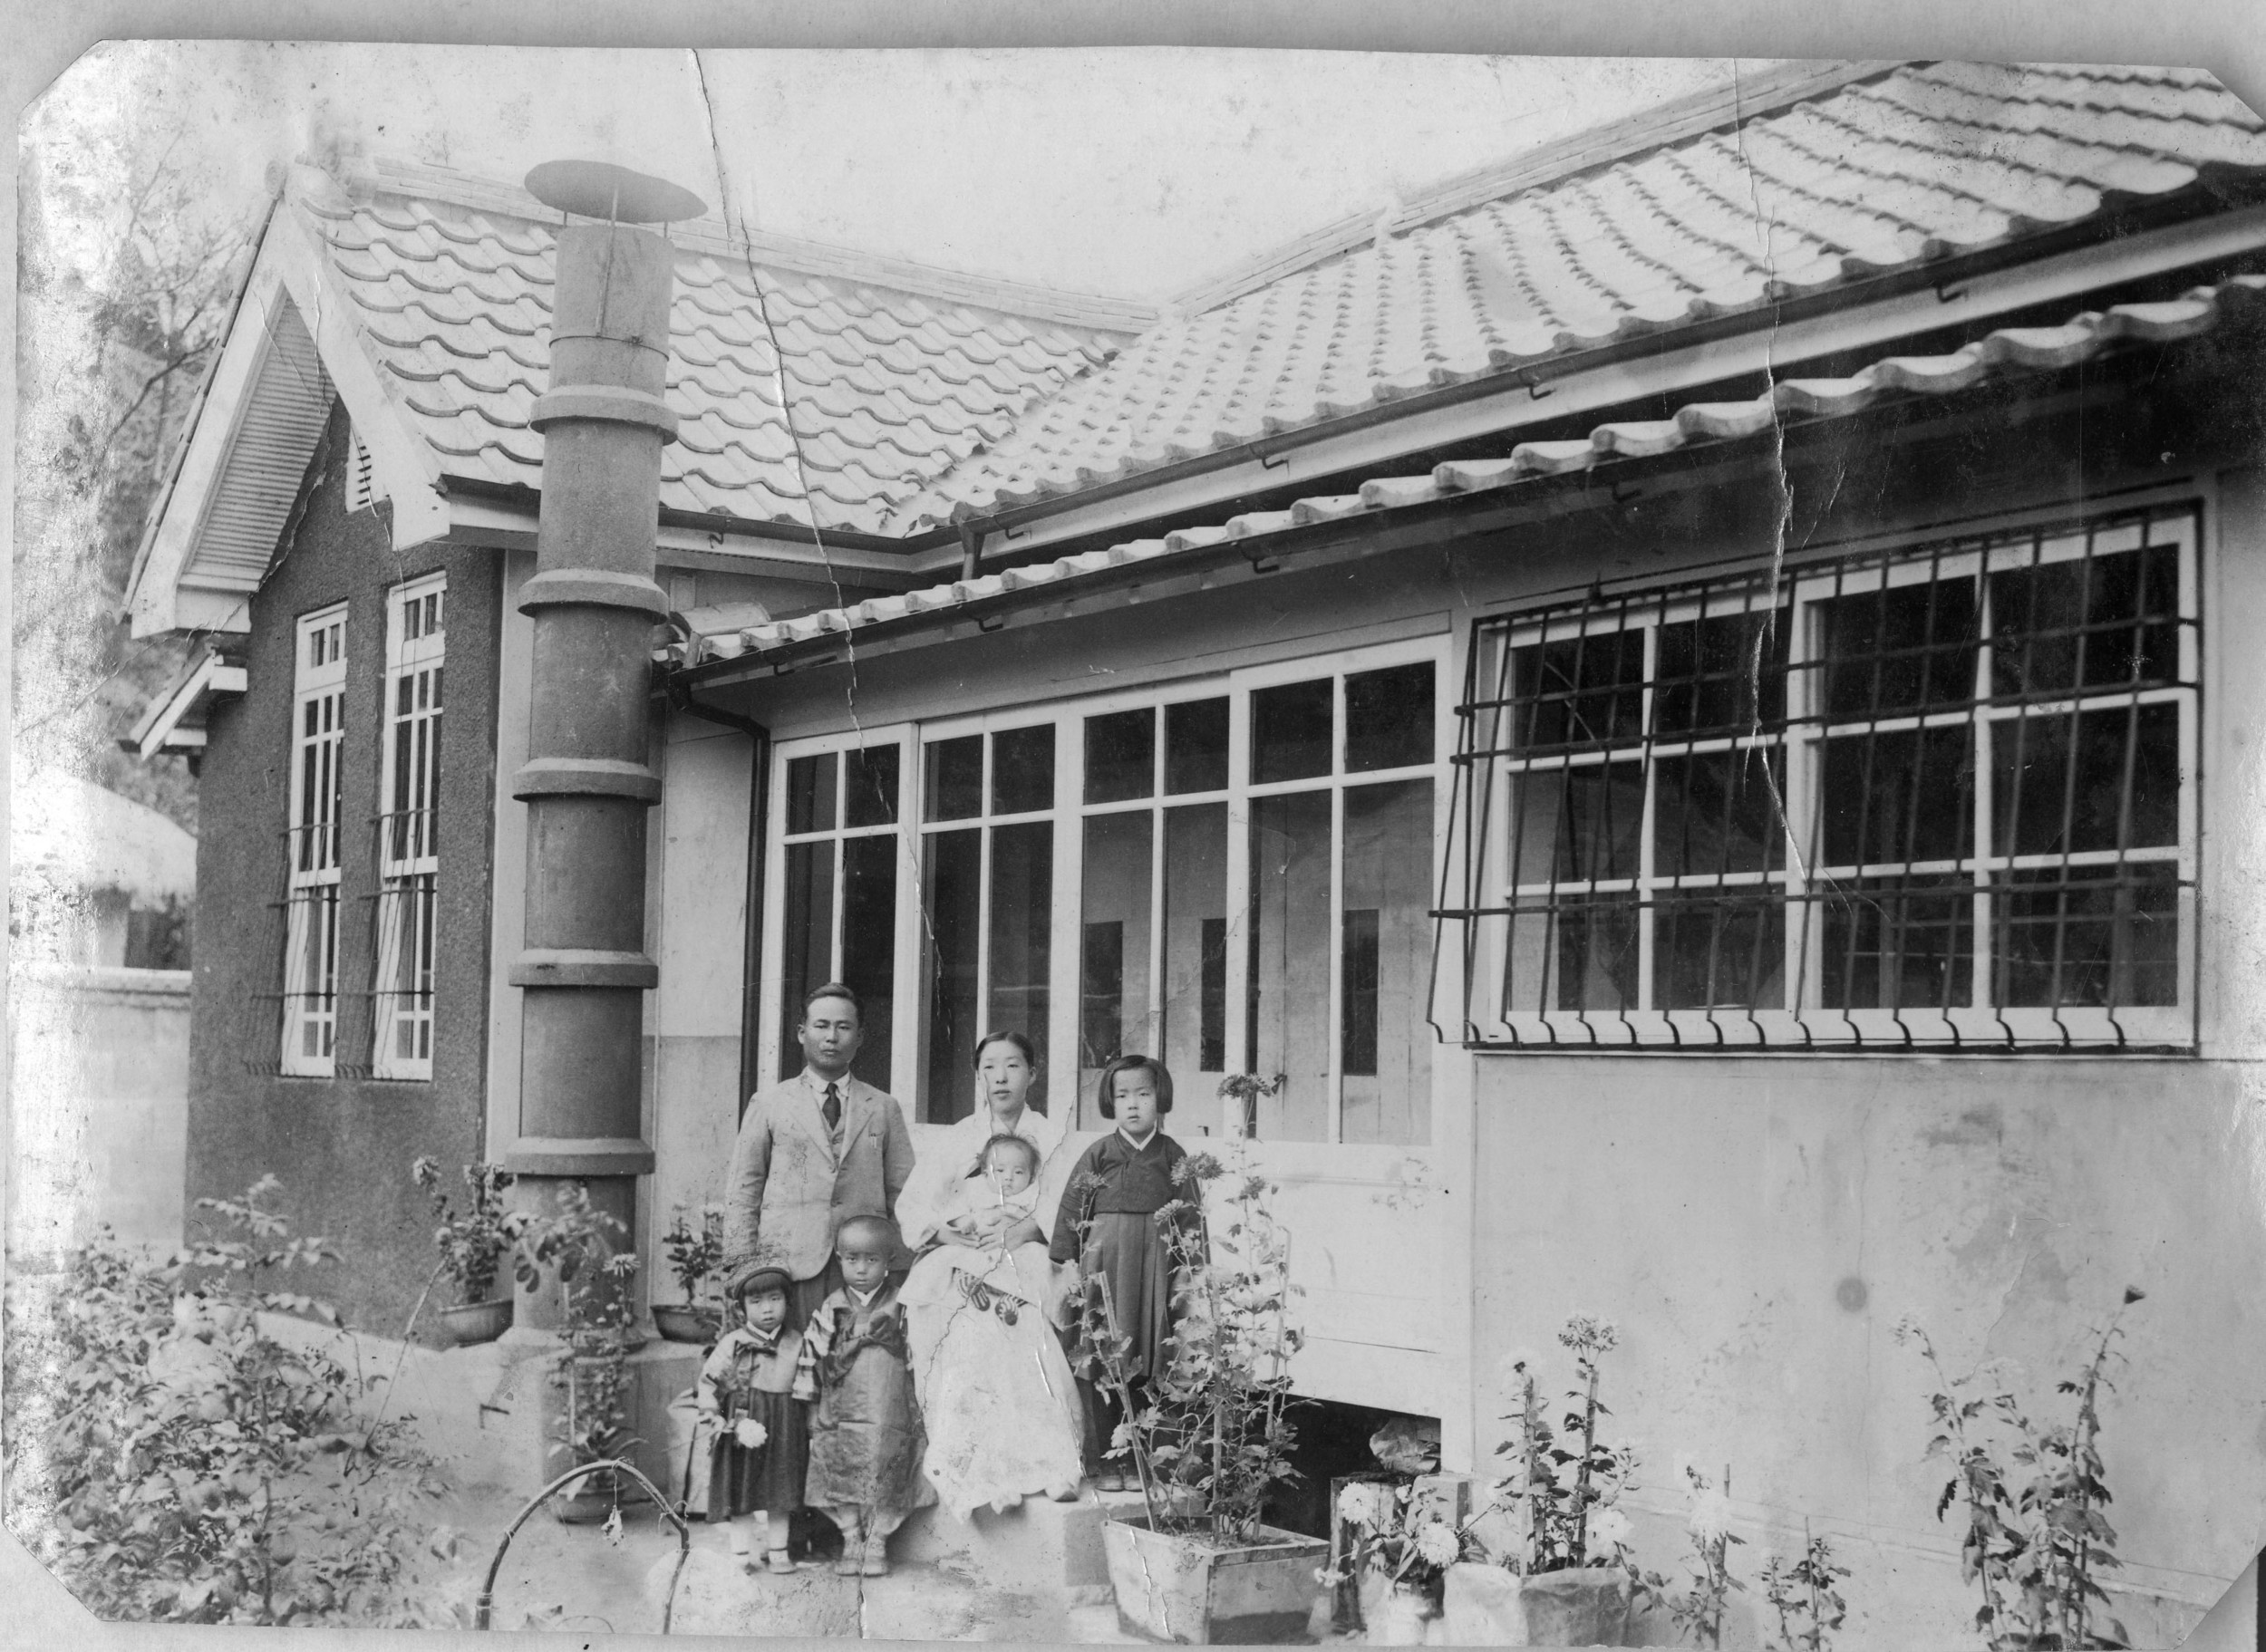  Kook Dong Pae (2nd from the left) and his family in Taegu, circa 1938 